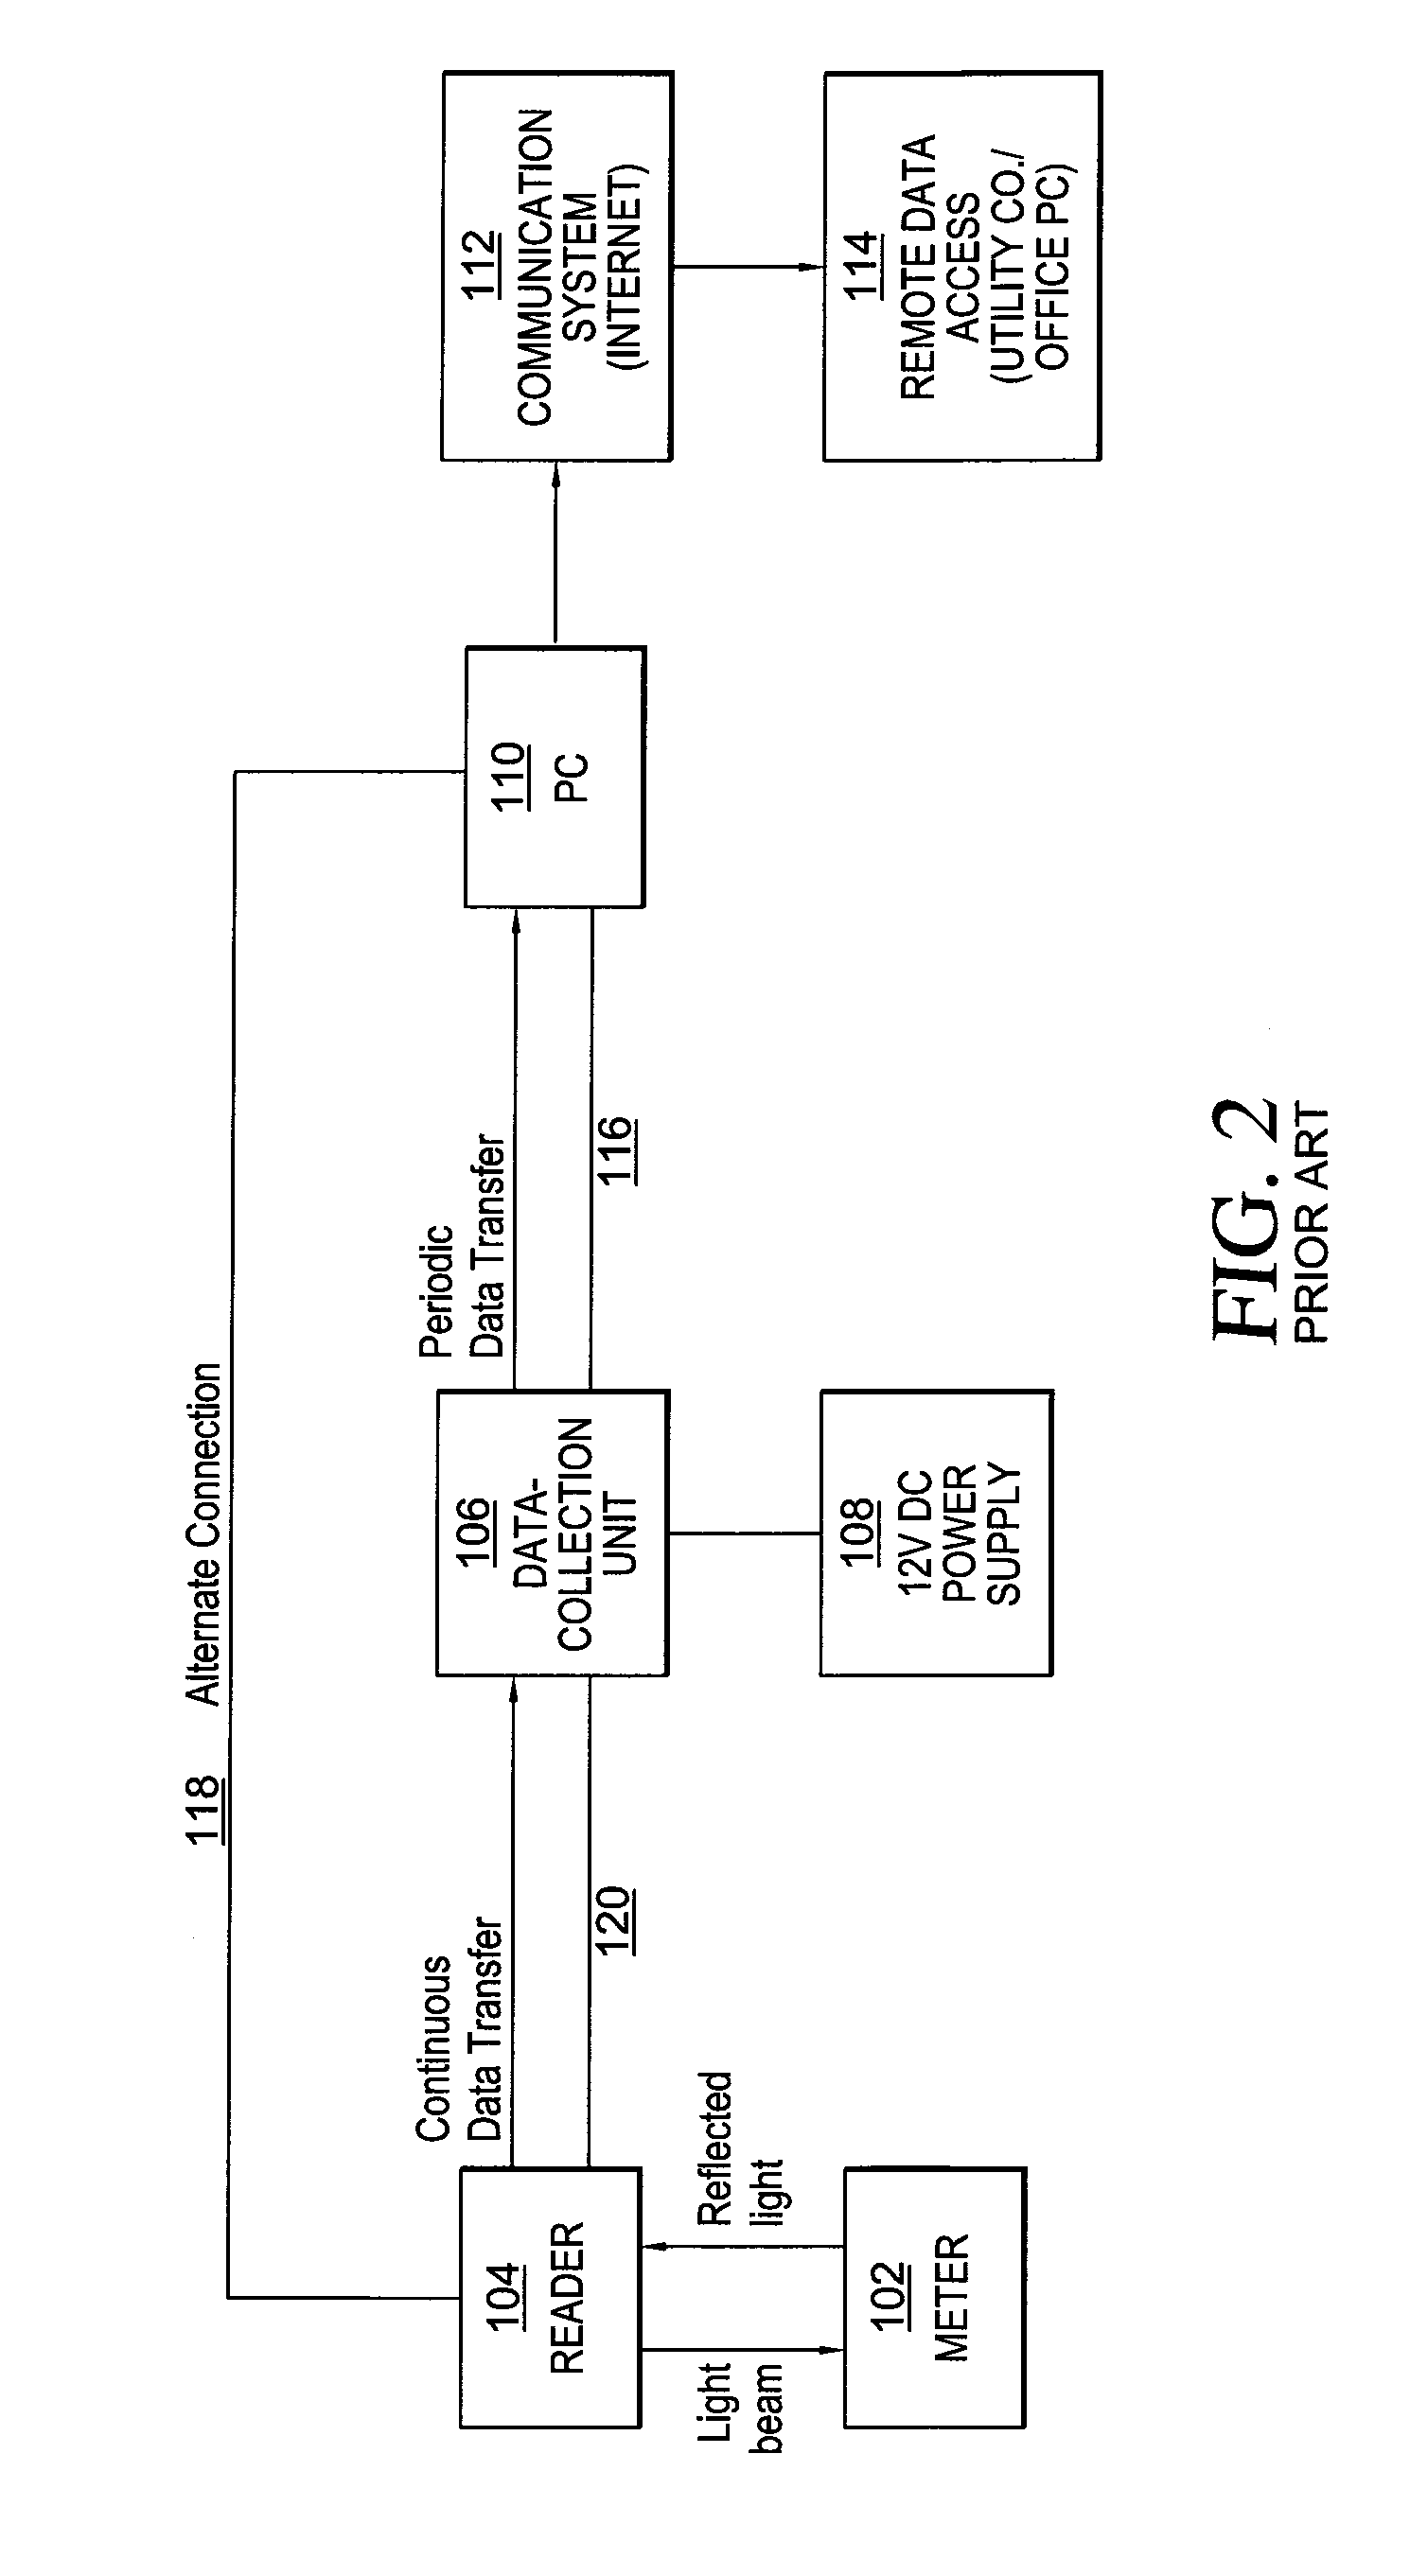 System for monitoring and controlling the consumption of a utility